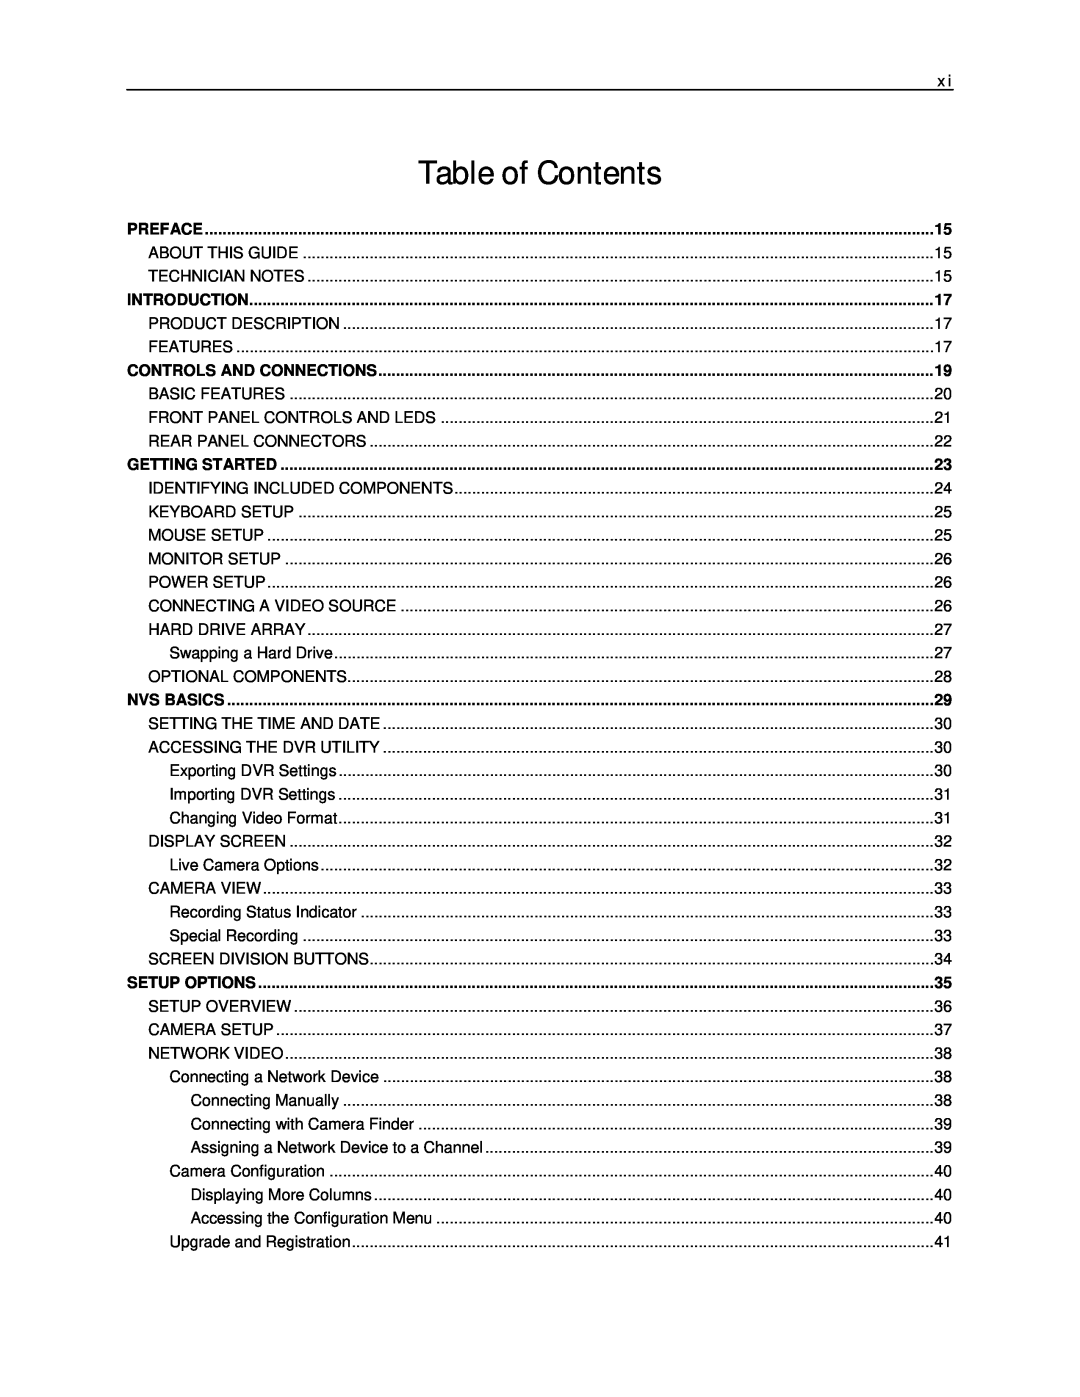 Toshiba NVS8-X, NVS32-X Table of Contents, Preface, Introduction, Controls And Connections, Getting Started, Nvs Basics 